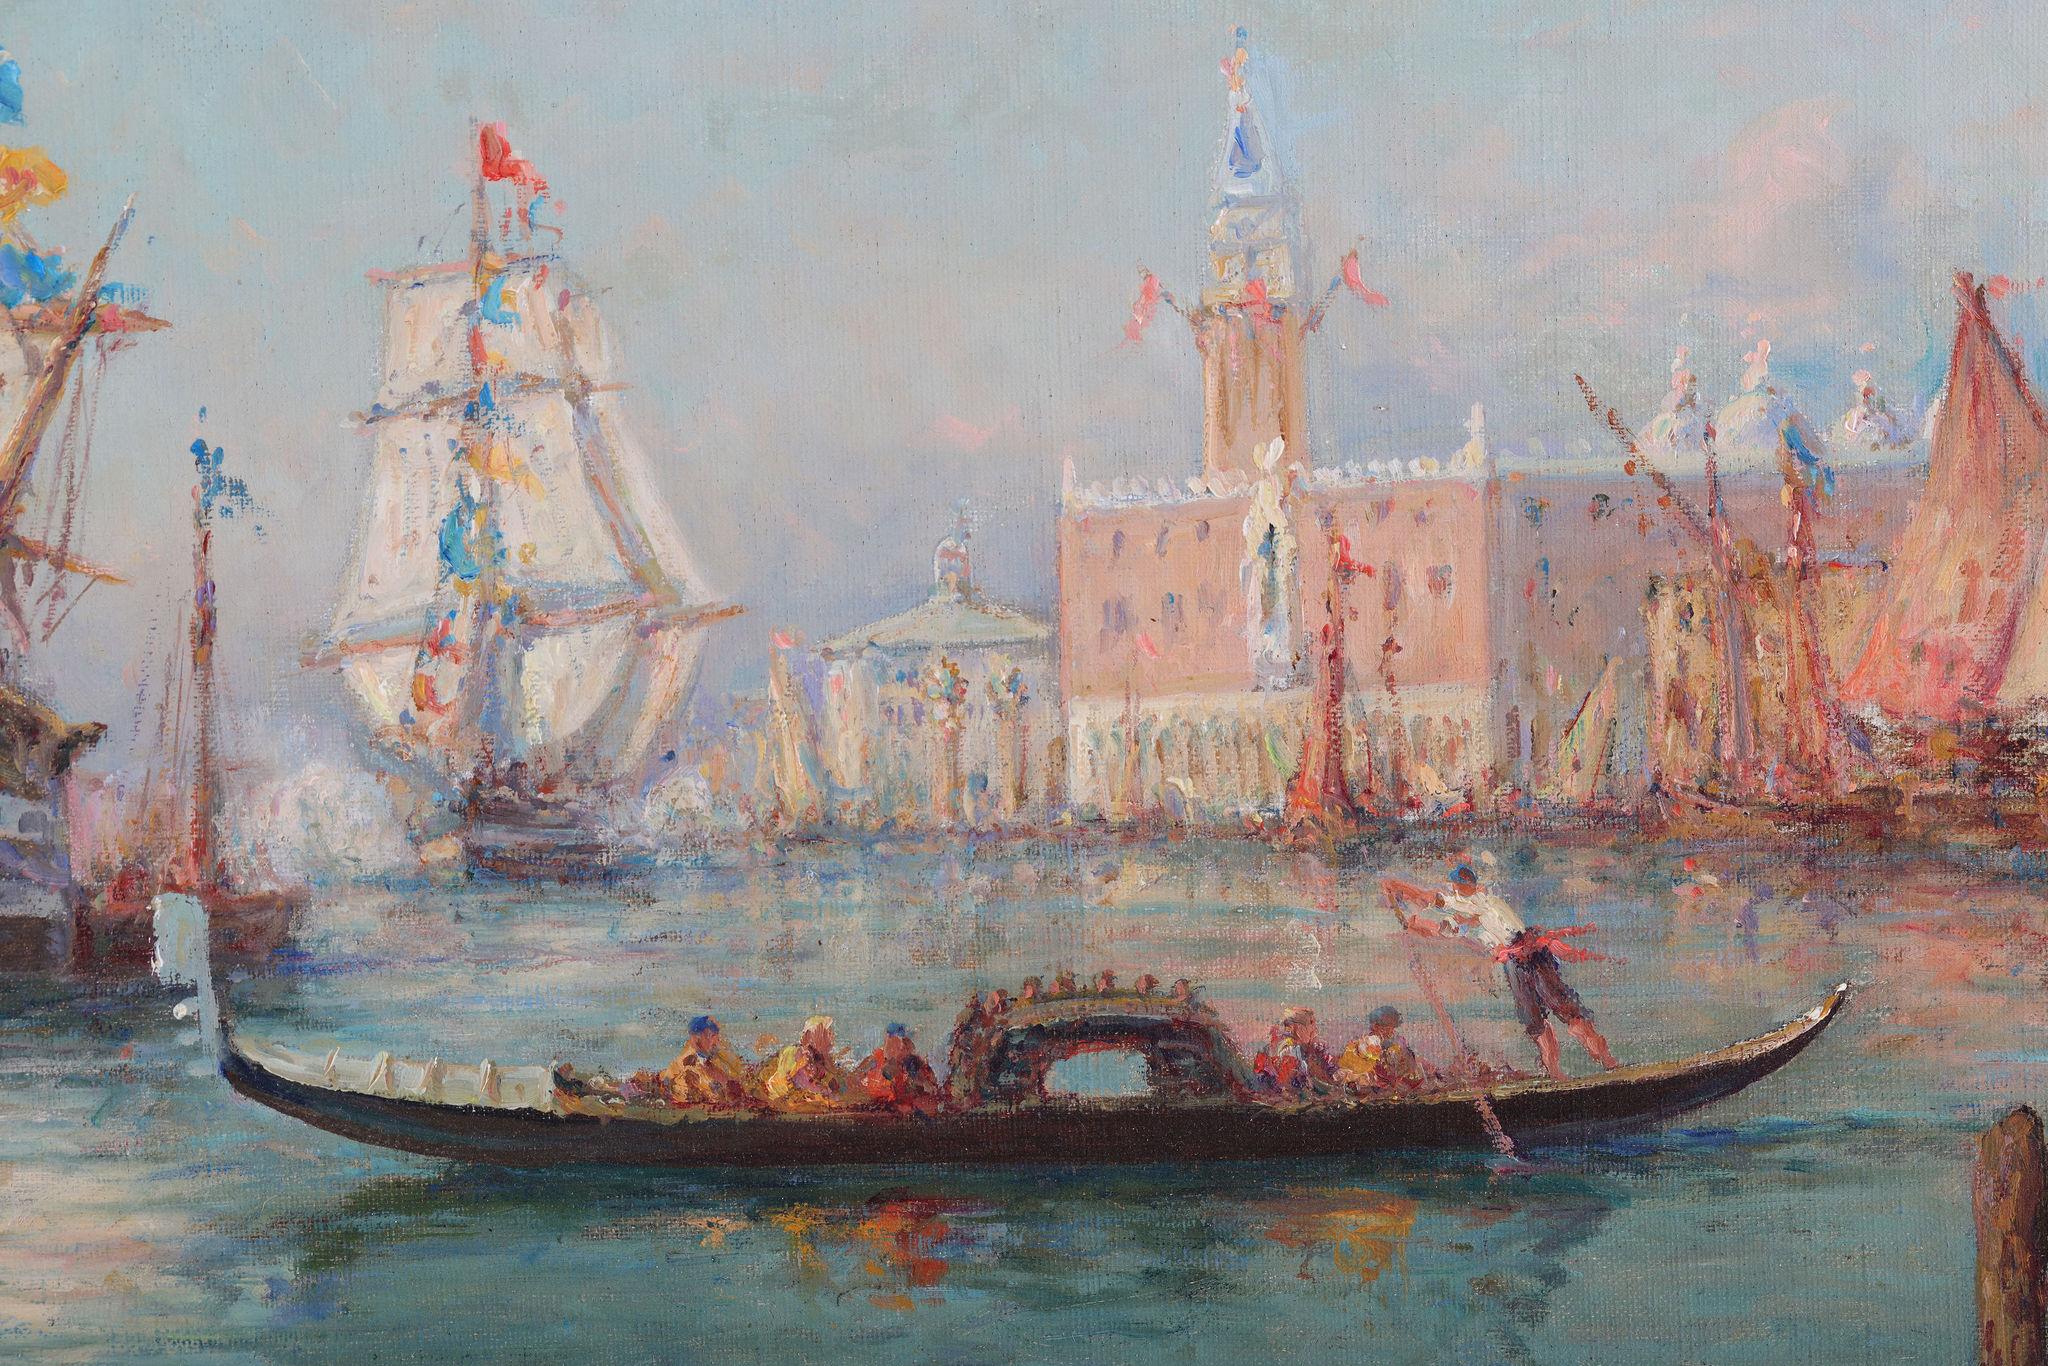 'Salut De Venice' The Homecoming . Venice - French School Painting by Henry Malfroy